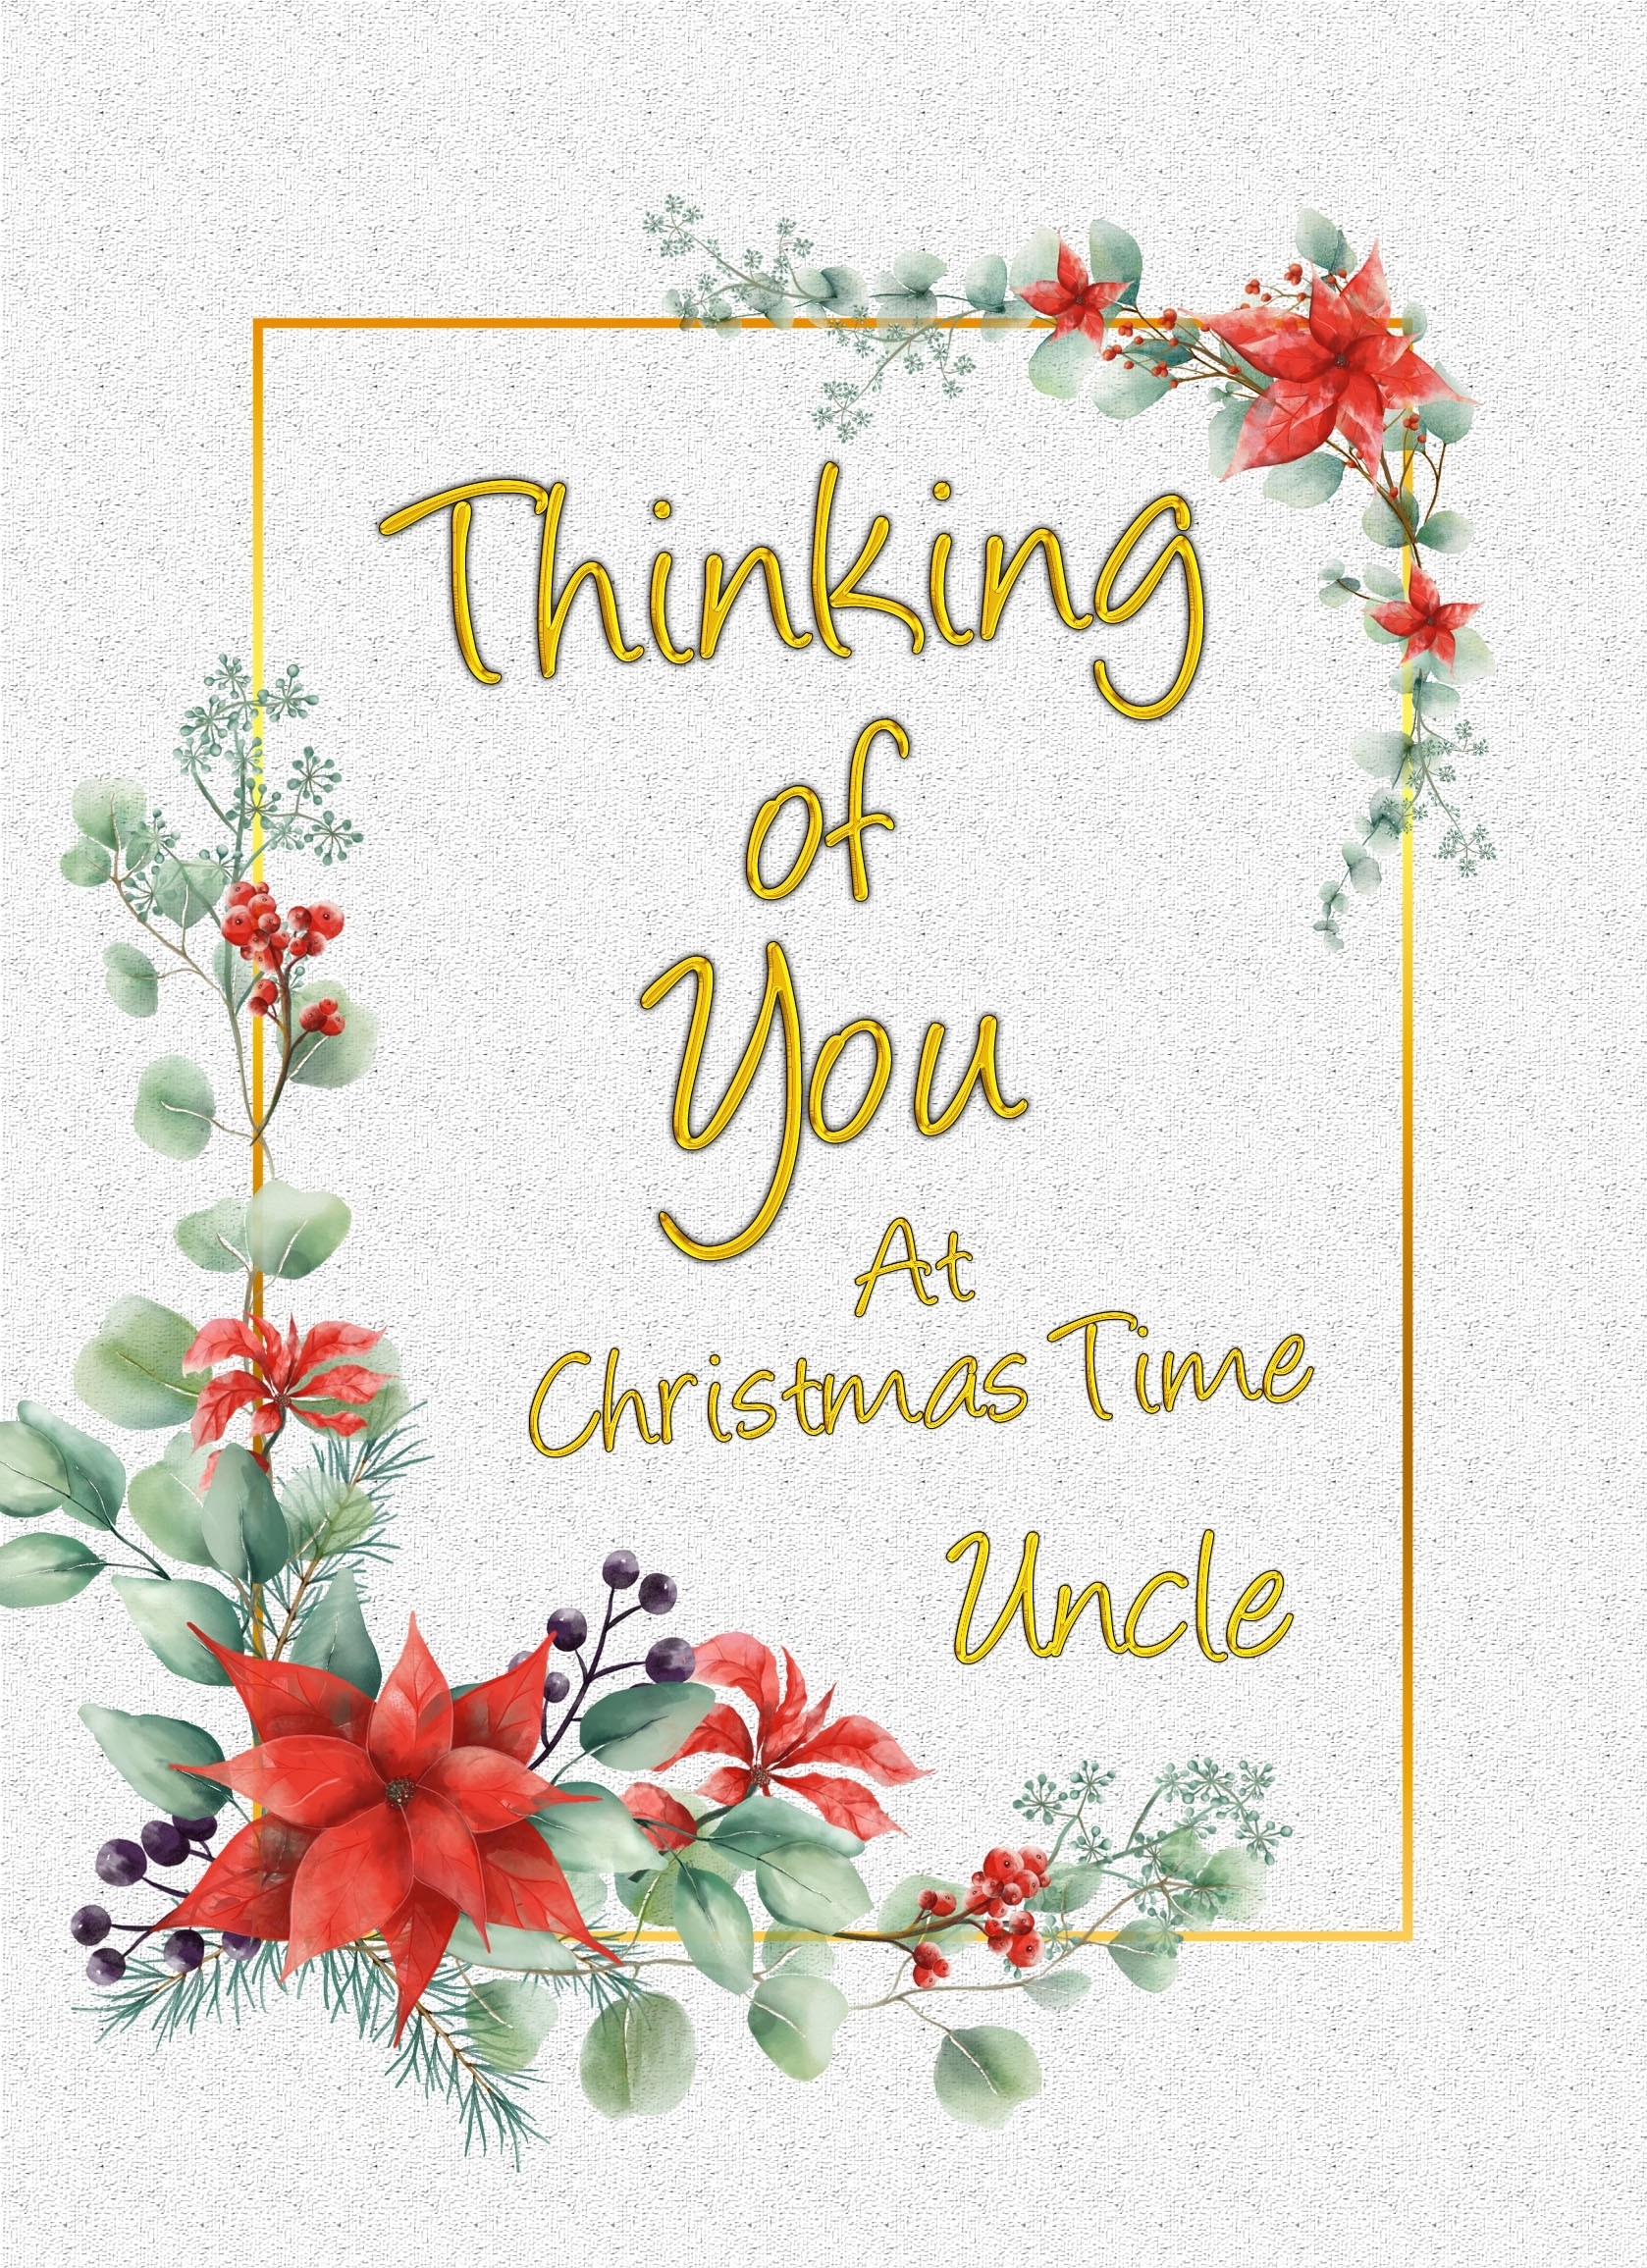 Thinking of You at Christmas Card For Uncle